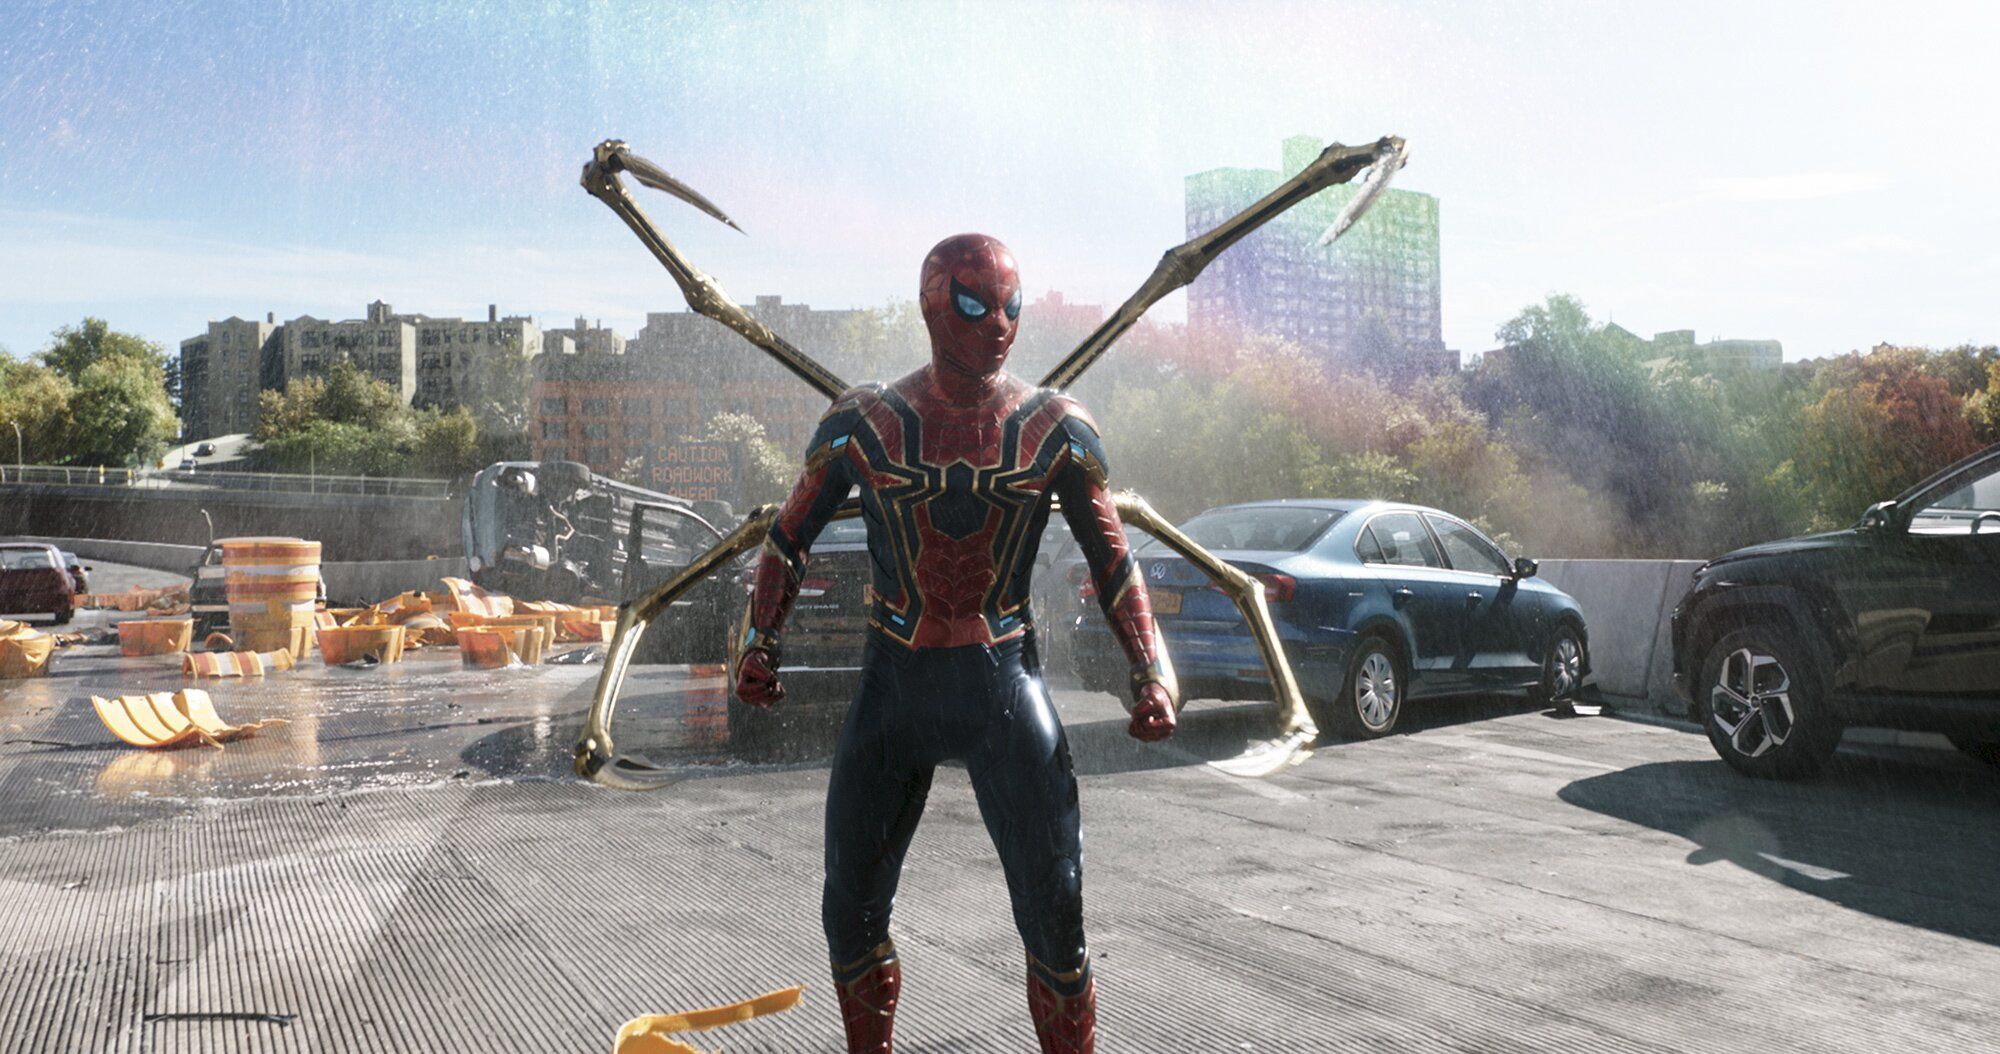 Spider-Man: No Way Home' Review - Tom Holland Franchise Still Exciting